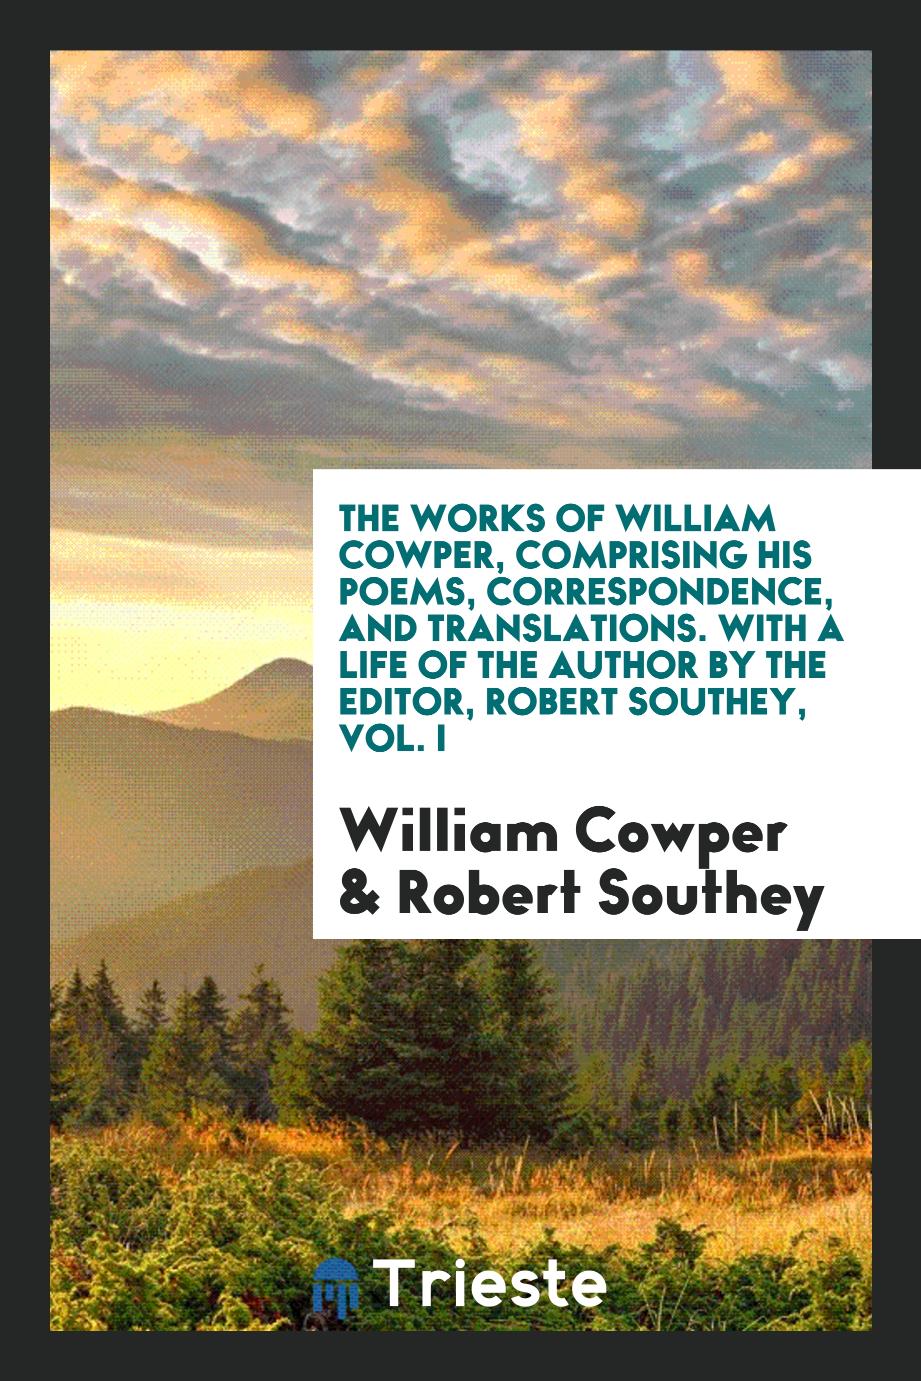 The Works of William Cowper, Comprising His Poems, Correspondence, and Translations. With a Life of the Author by the Editor, Robert Southey, Vol. I